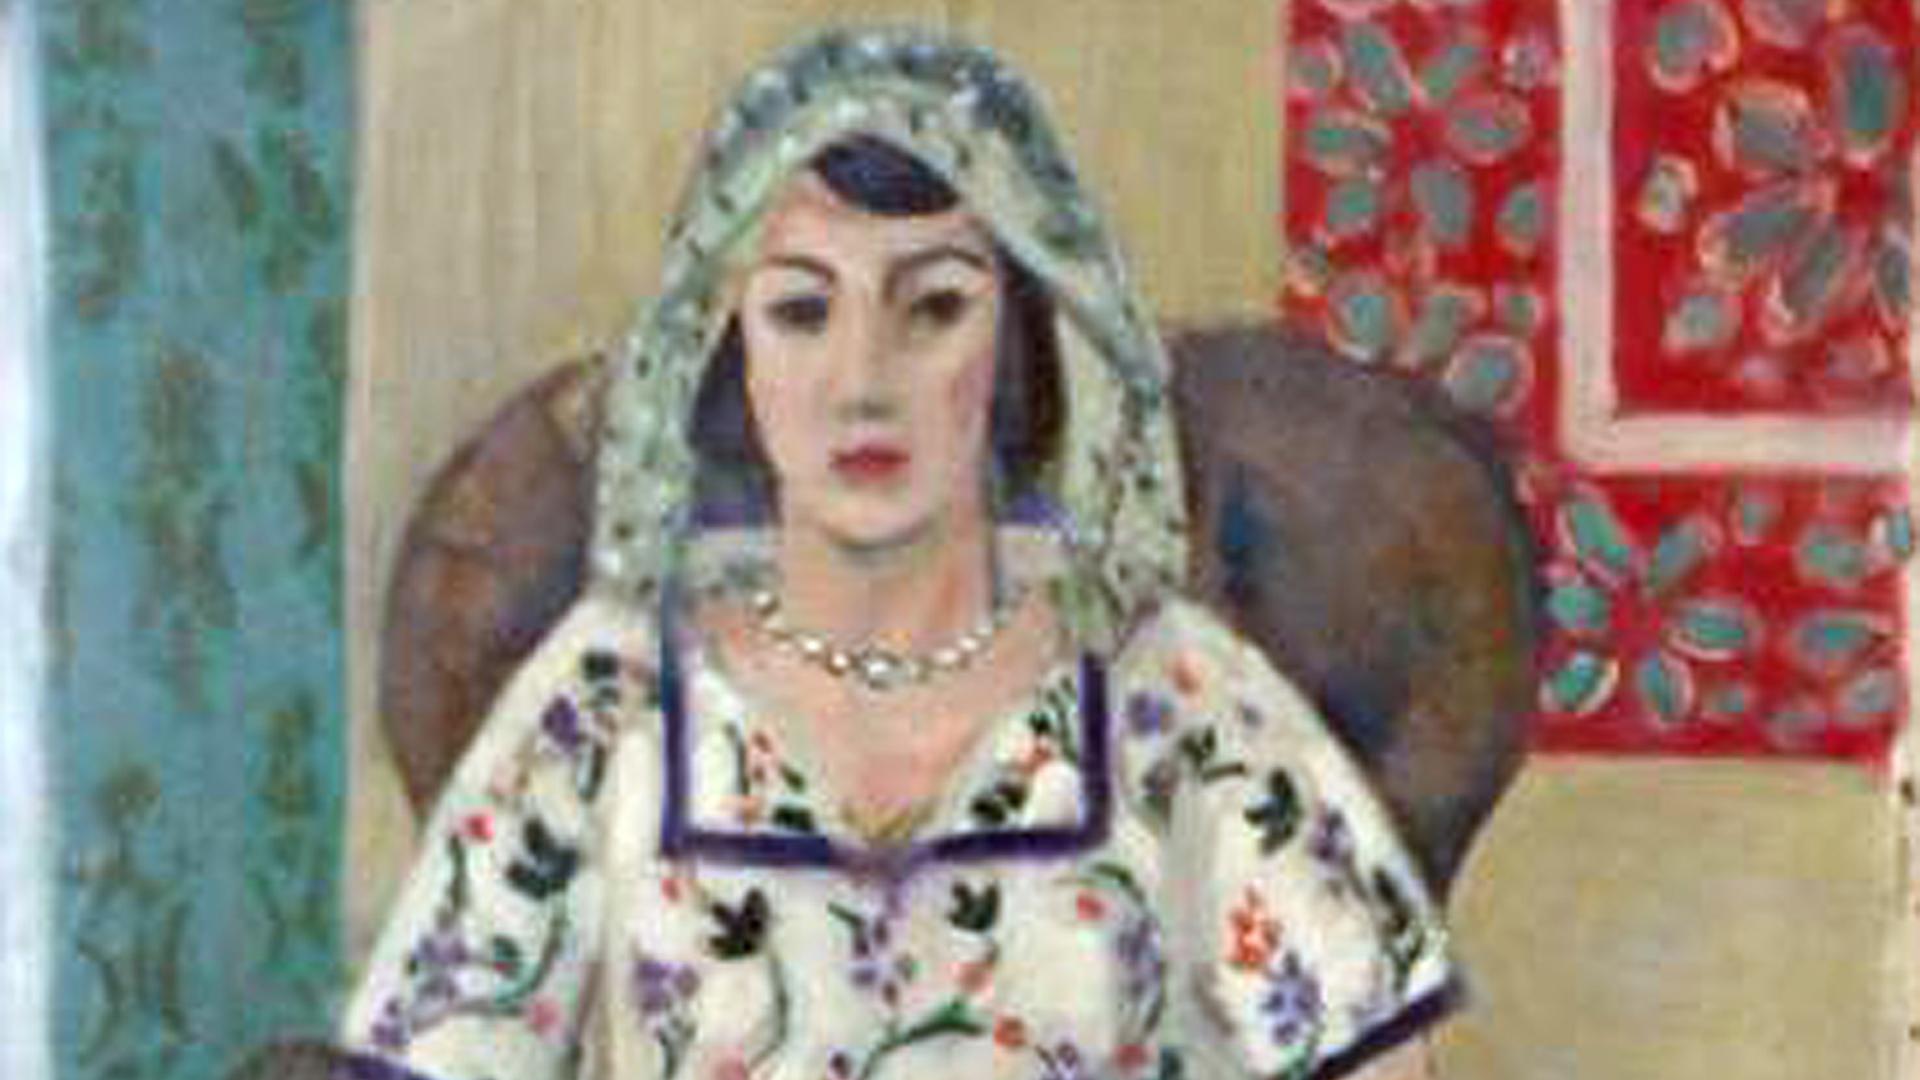 This Matisse painting is the object of competing claims in Germany.